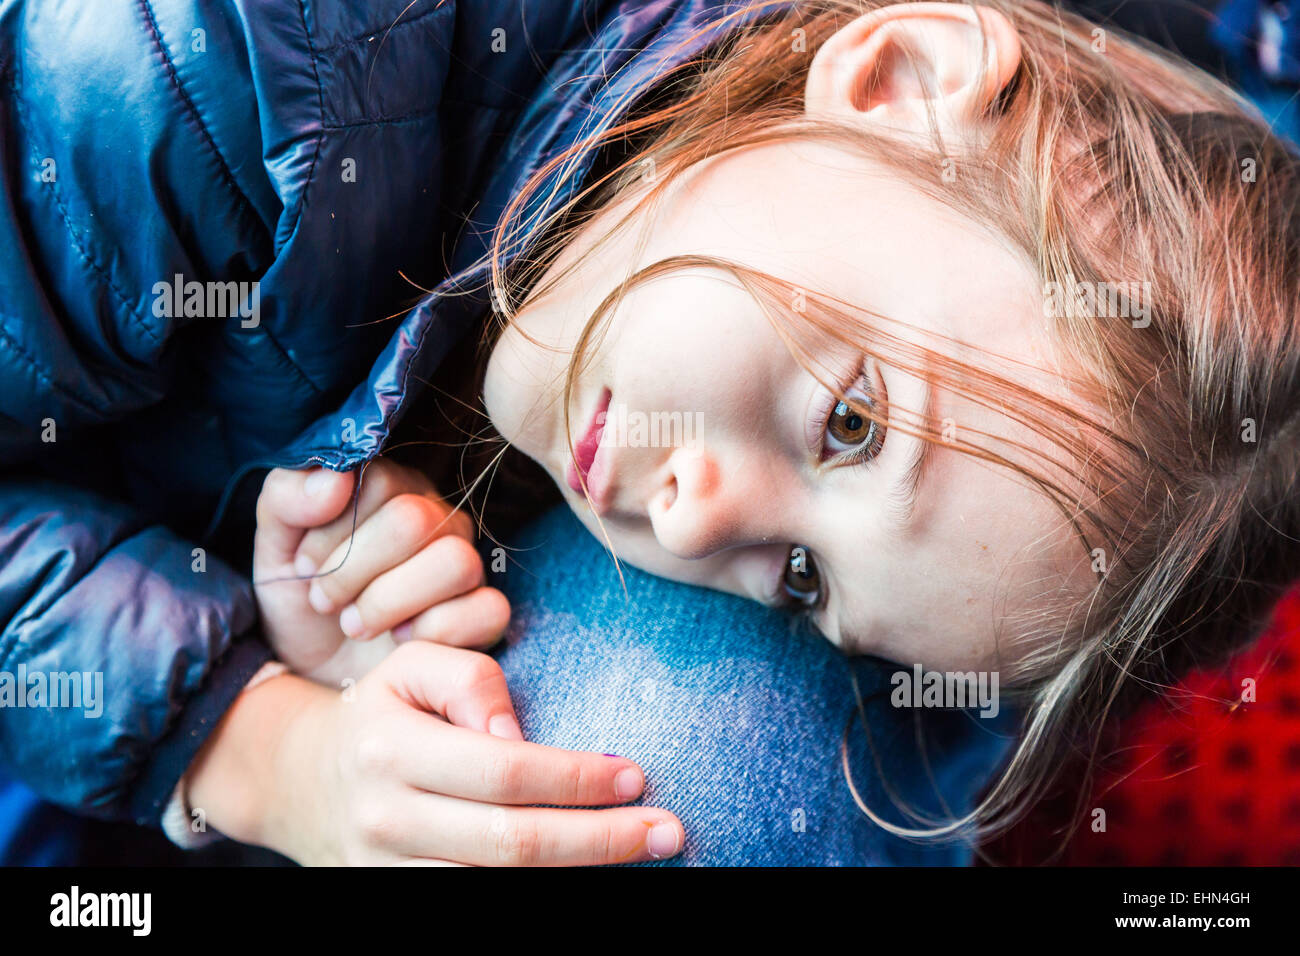 7 year old girl with her father. Stock Photo